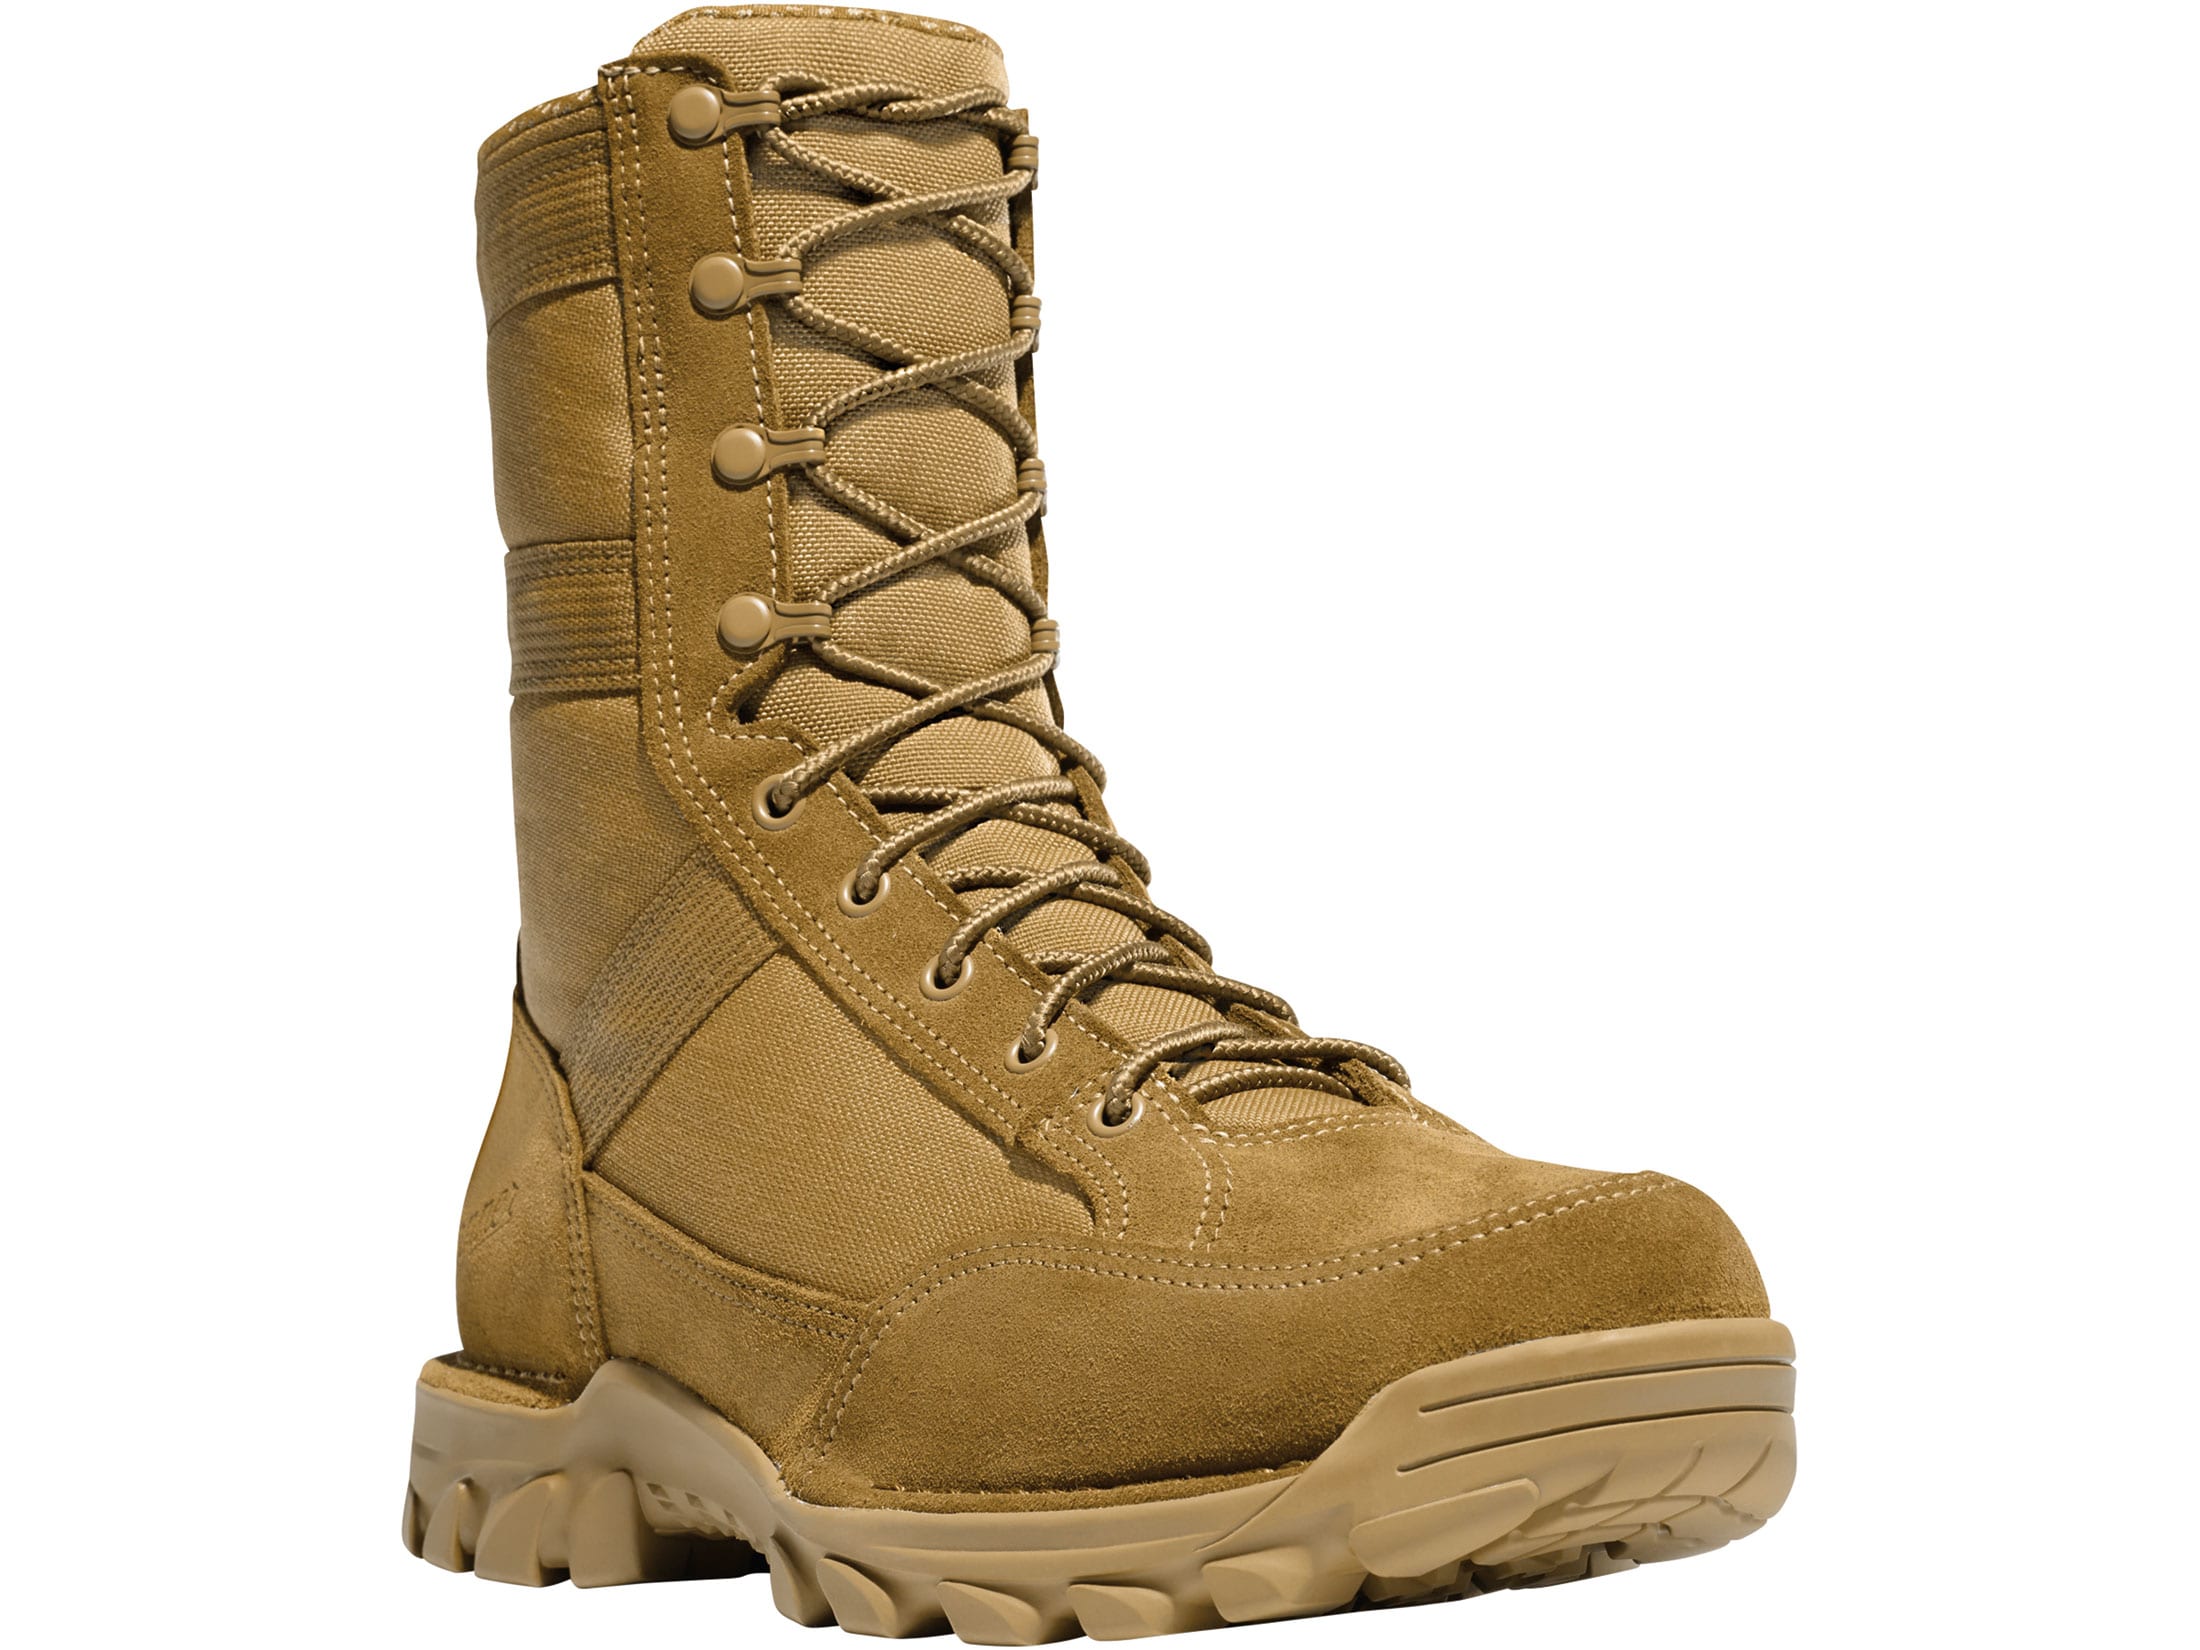 Danner Rivot TFX 8 400 Gram Insulated Tactical Boots Leather Coyote